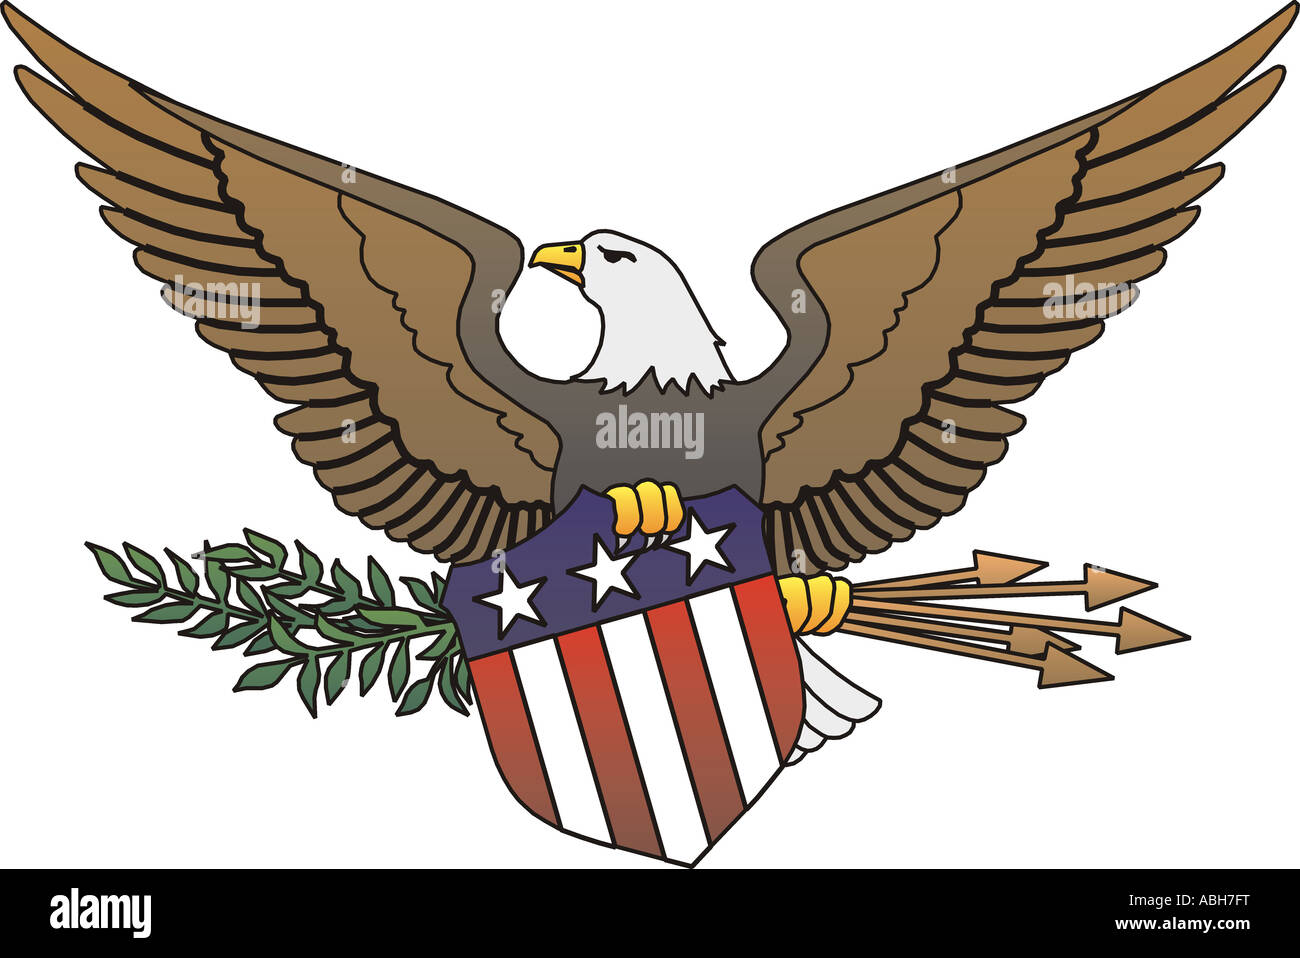 The Great Seal Of The United States Of America Stock Photo